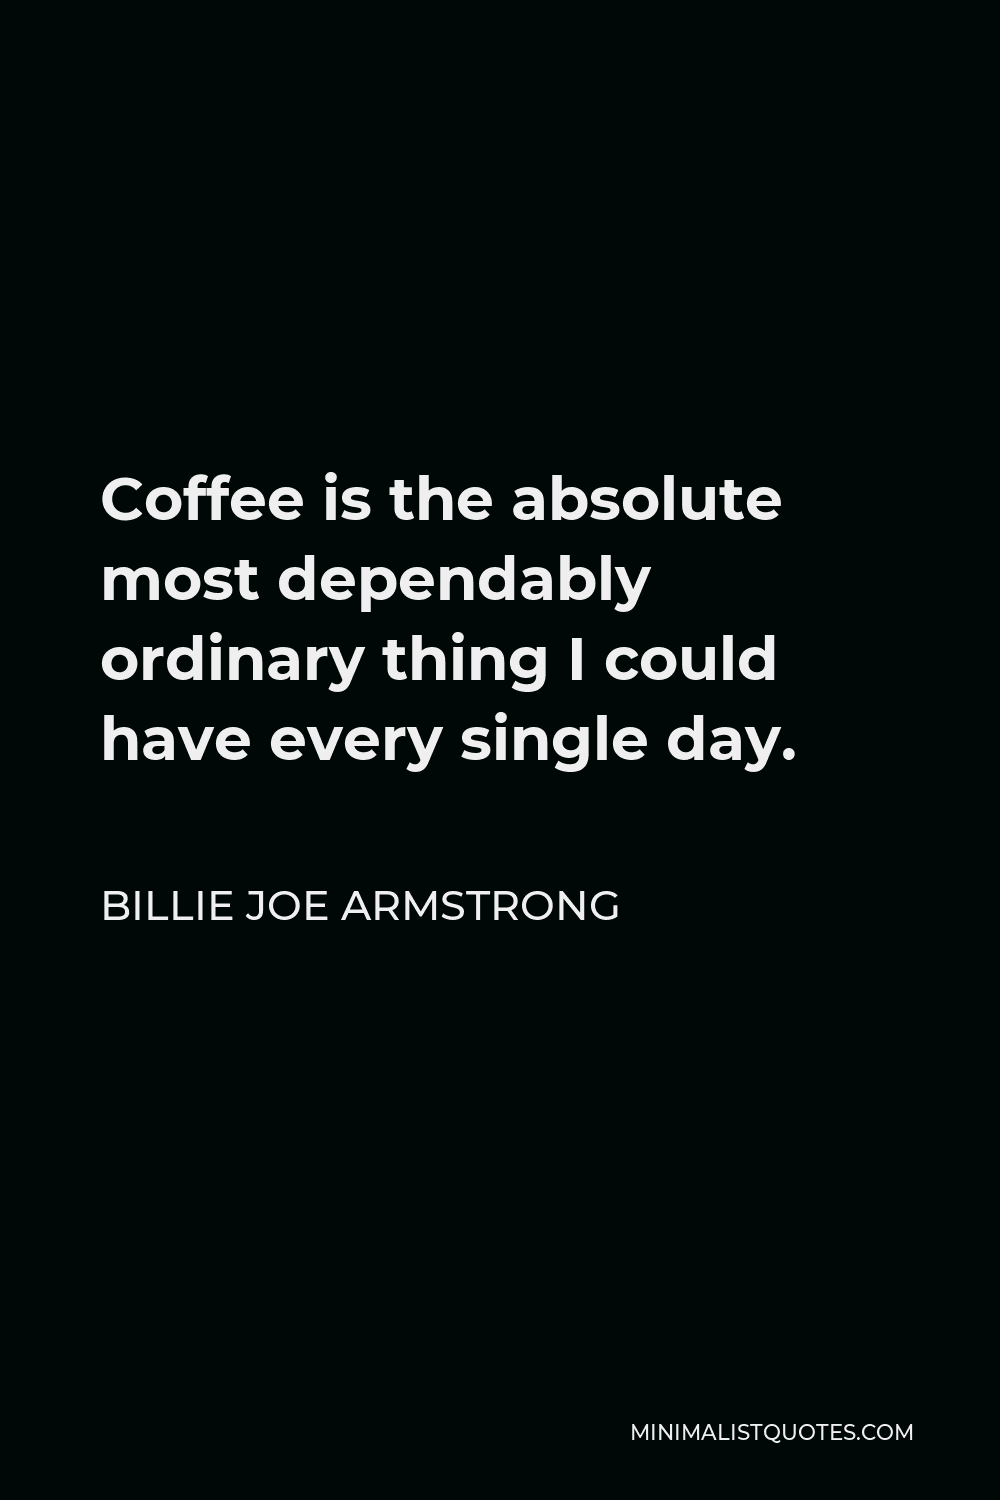 Billie Joe Armstrong Quote - Coffee is the absolute most dependably ordinary thing I could have every single day.